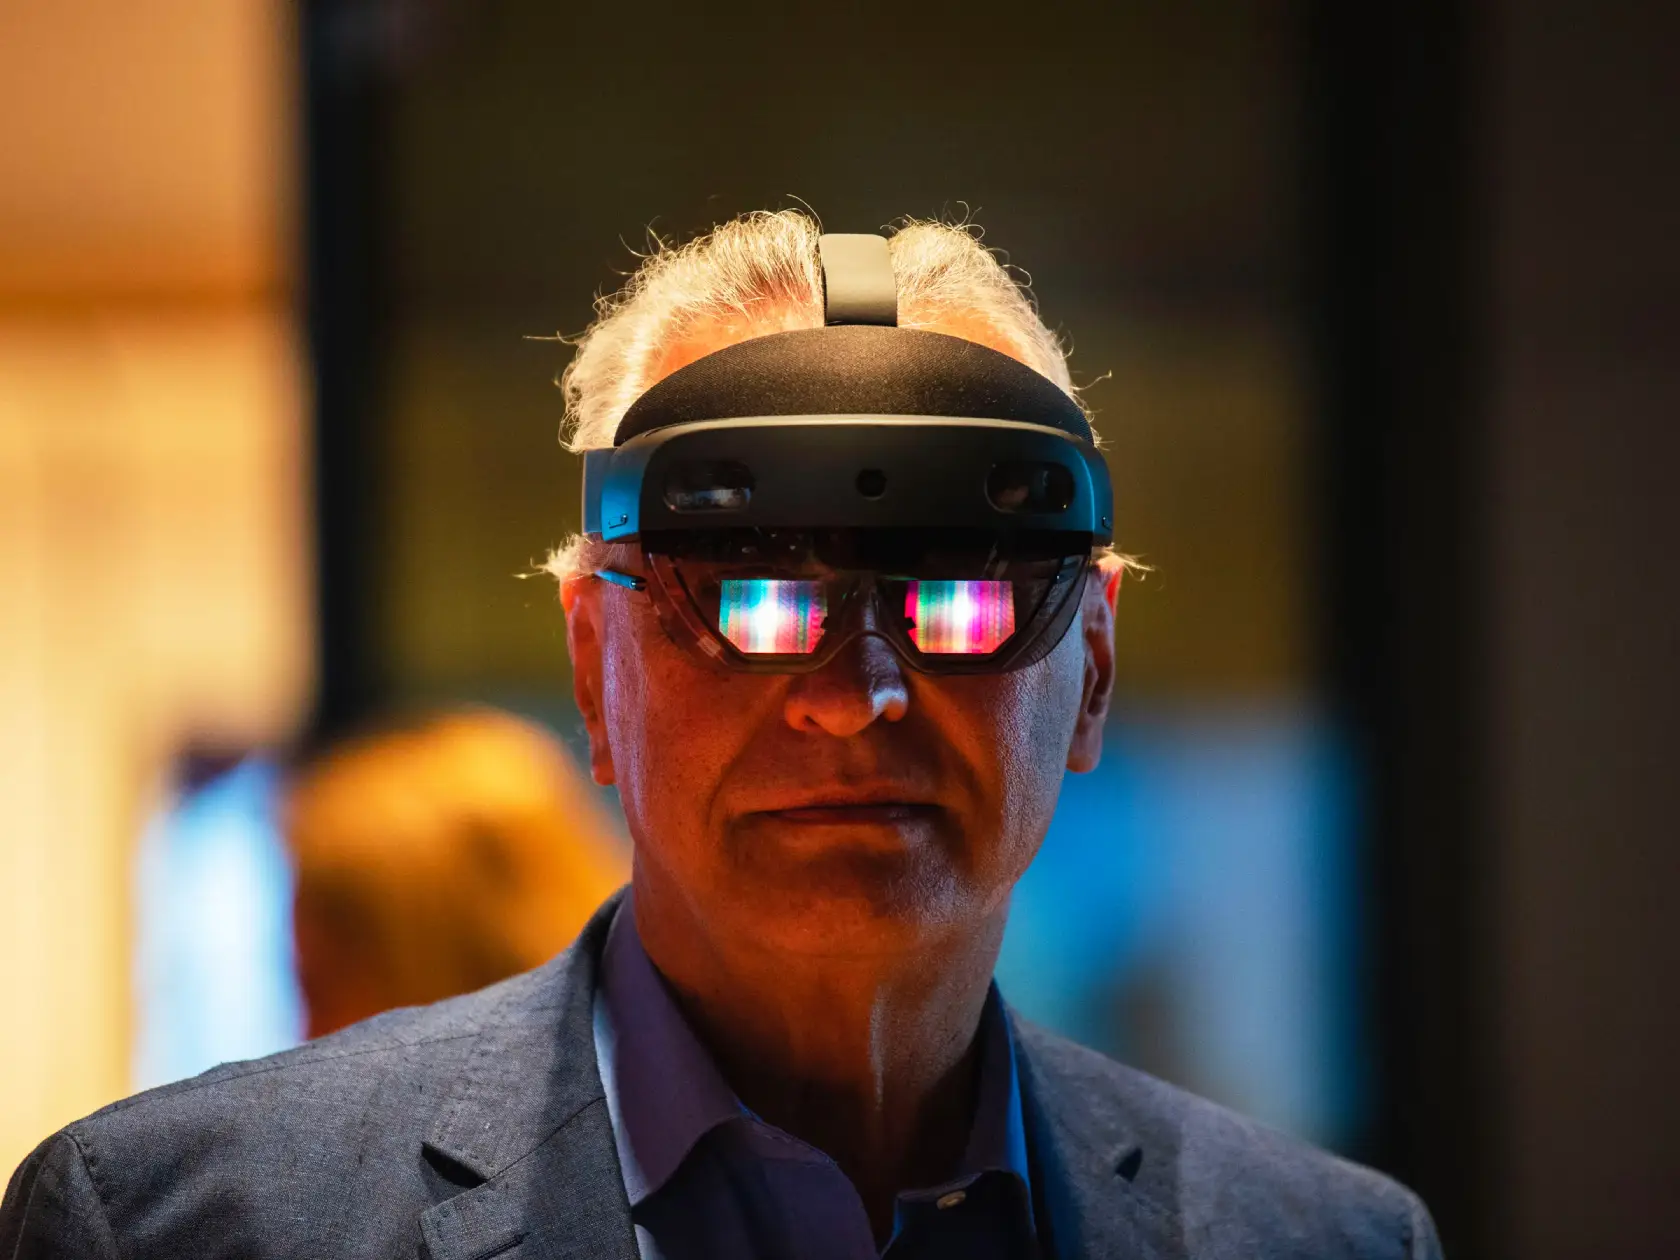 An old man in a blue suit looking into the camera wearing a sleek black augmented reality headset called a Microsoft Hololens.